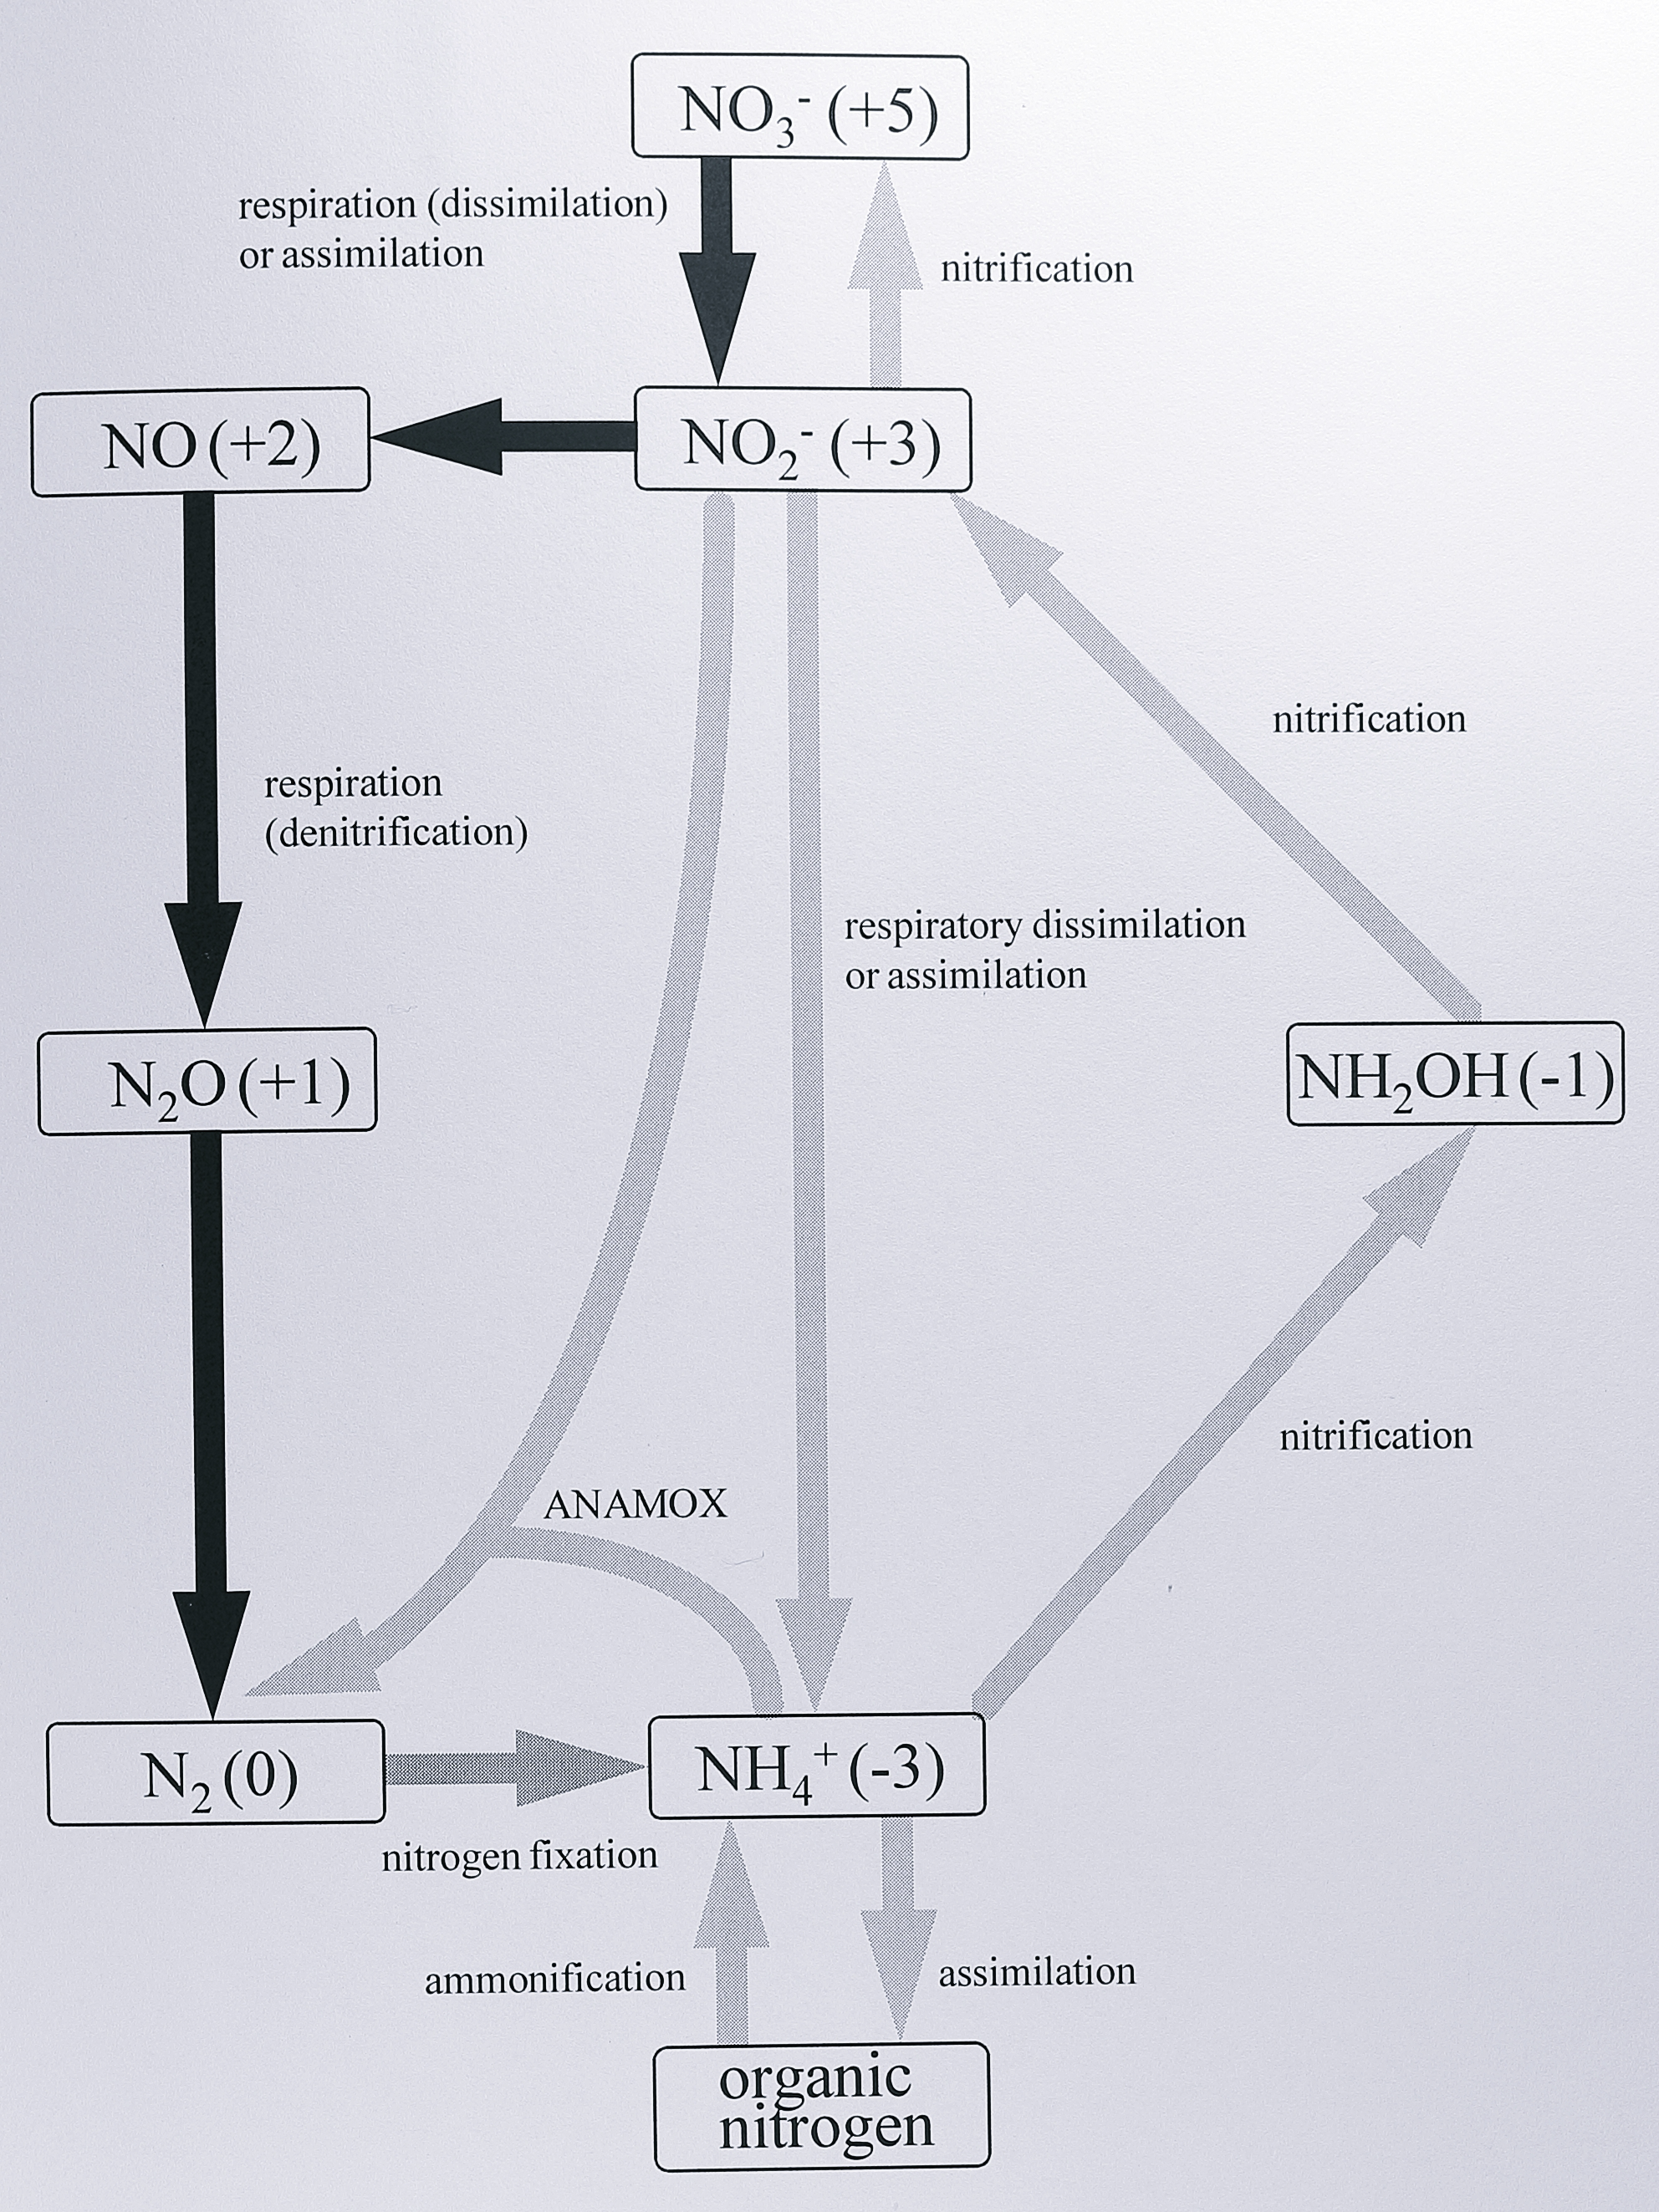 The nitrogen cycle. The oxidation state of nitrogen in each intermediate is given in brackets. Denitrification is shown by black arrows, nitrogen fixation by a dark grey arrow and all other reactions by light grey arrows. Note that nitrification involves two reactions, oxidation of ammonia to nitrite and of nitrite to nitrate, but these have never been found together in the same organism. ANAMOX (anaerobic ammonia oxidation) is a poorly-characterised process in which nitrite and ammonia combine to give water and dinitrogen [@fry_nitrogen_1992].